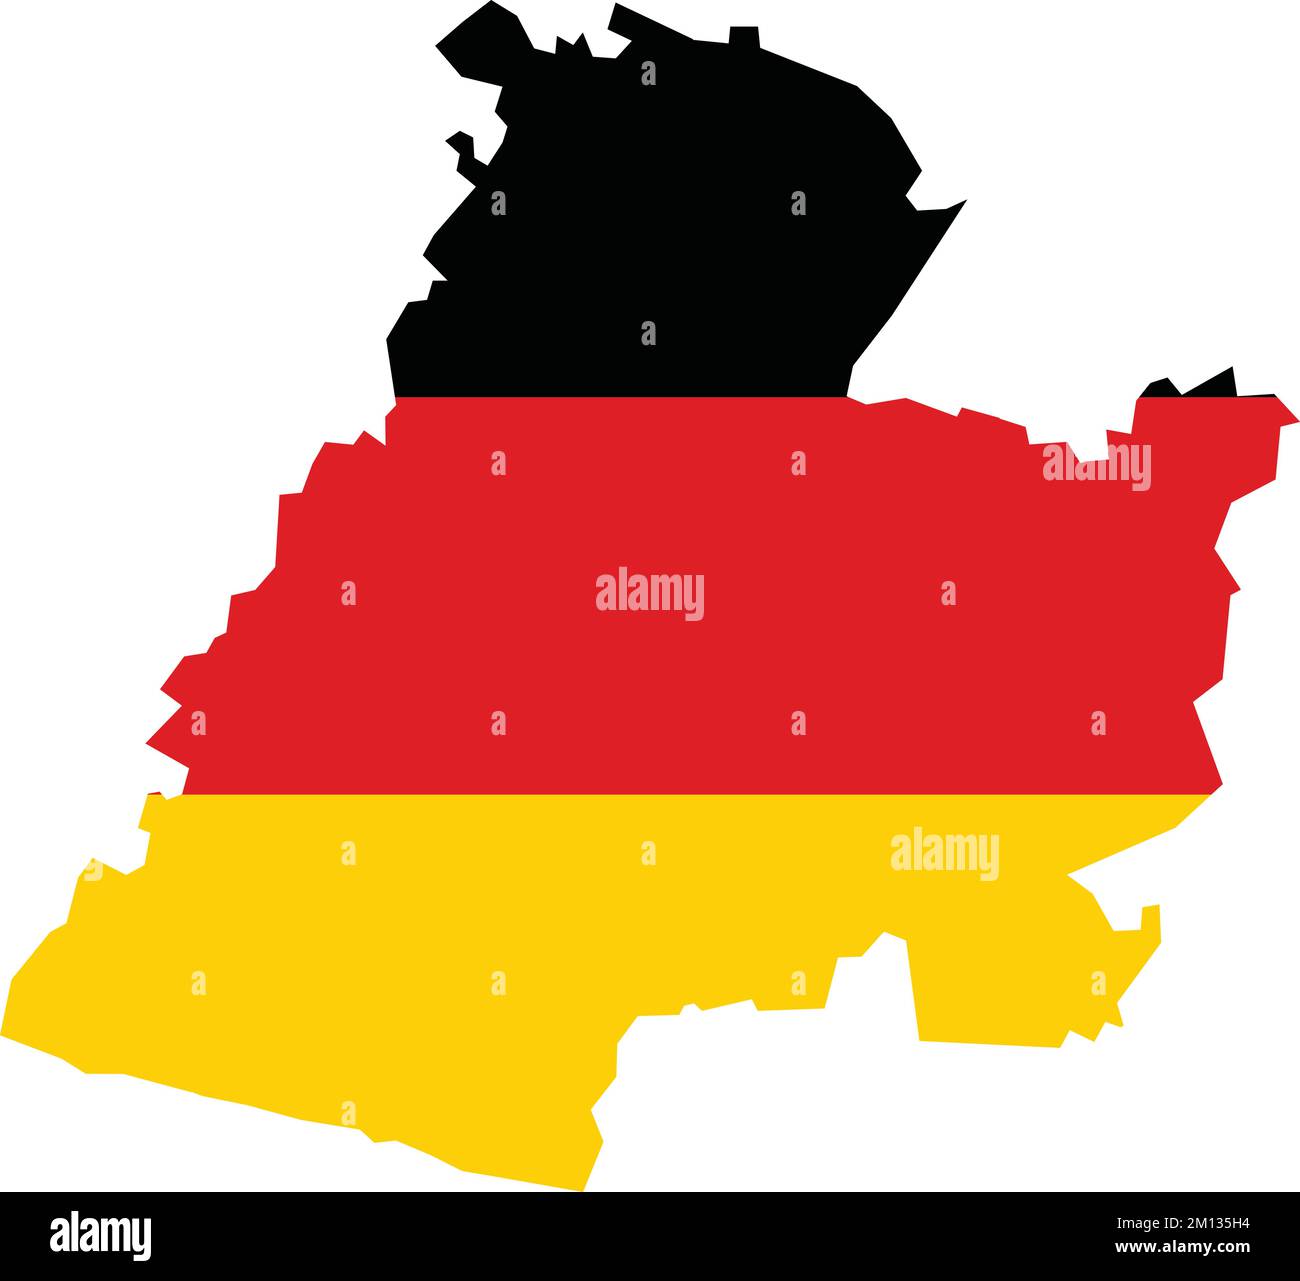 Flag map of MINDEN, GERMANY Stock Vector